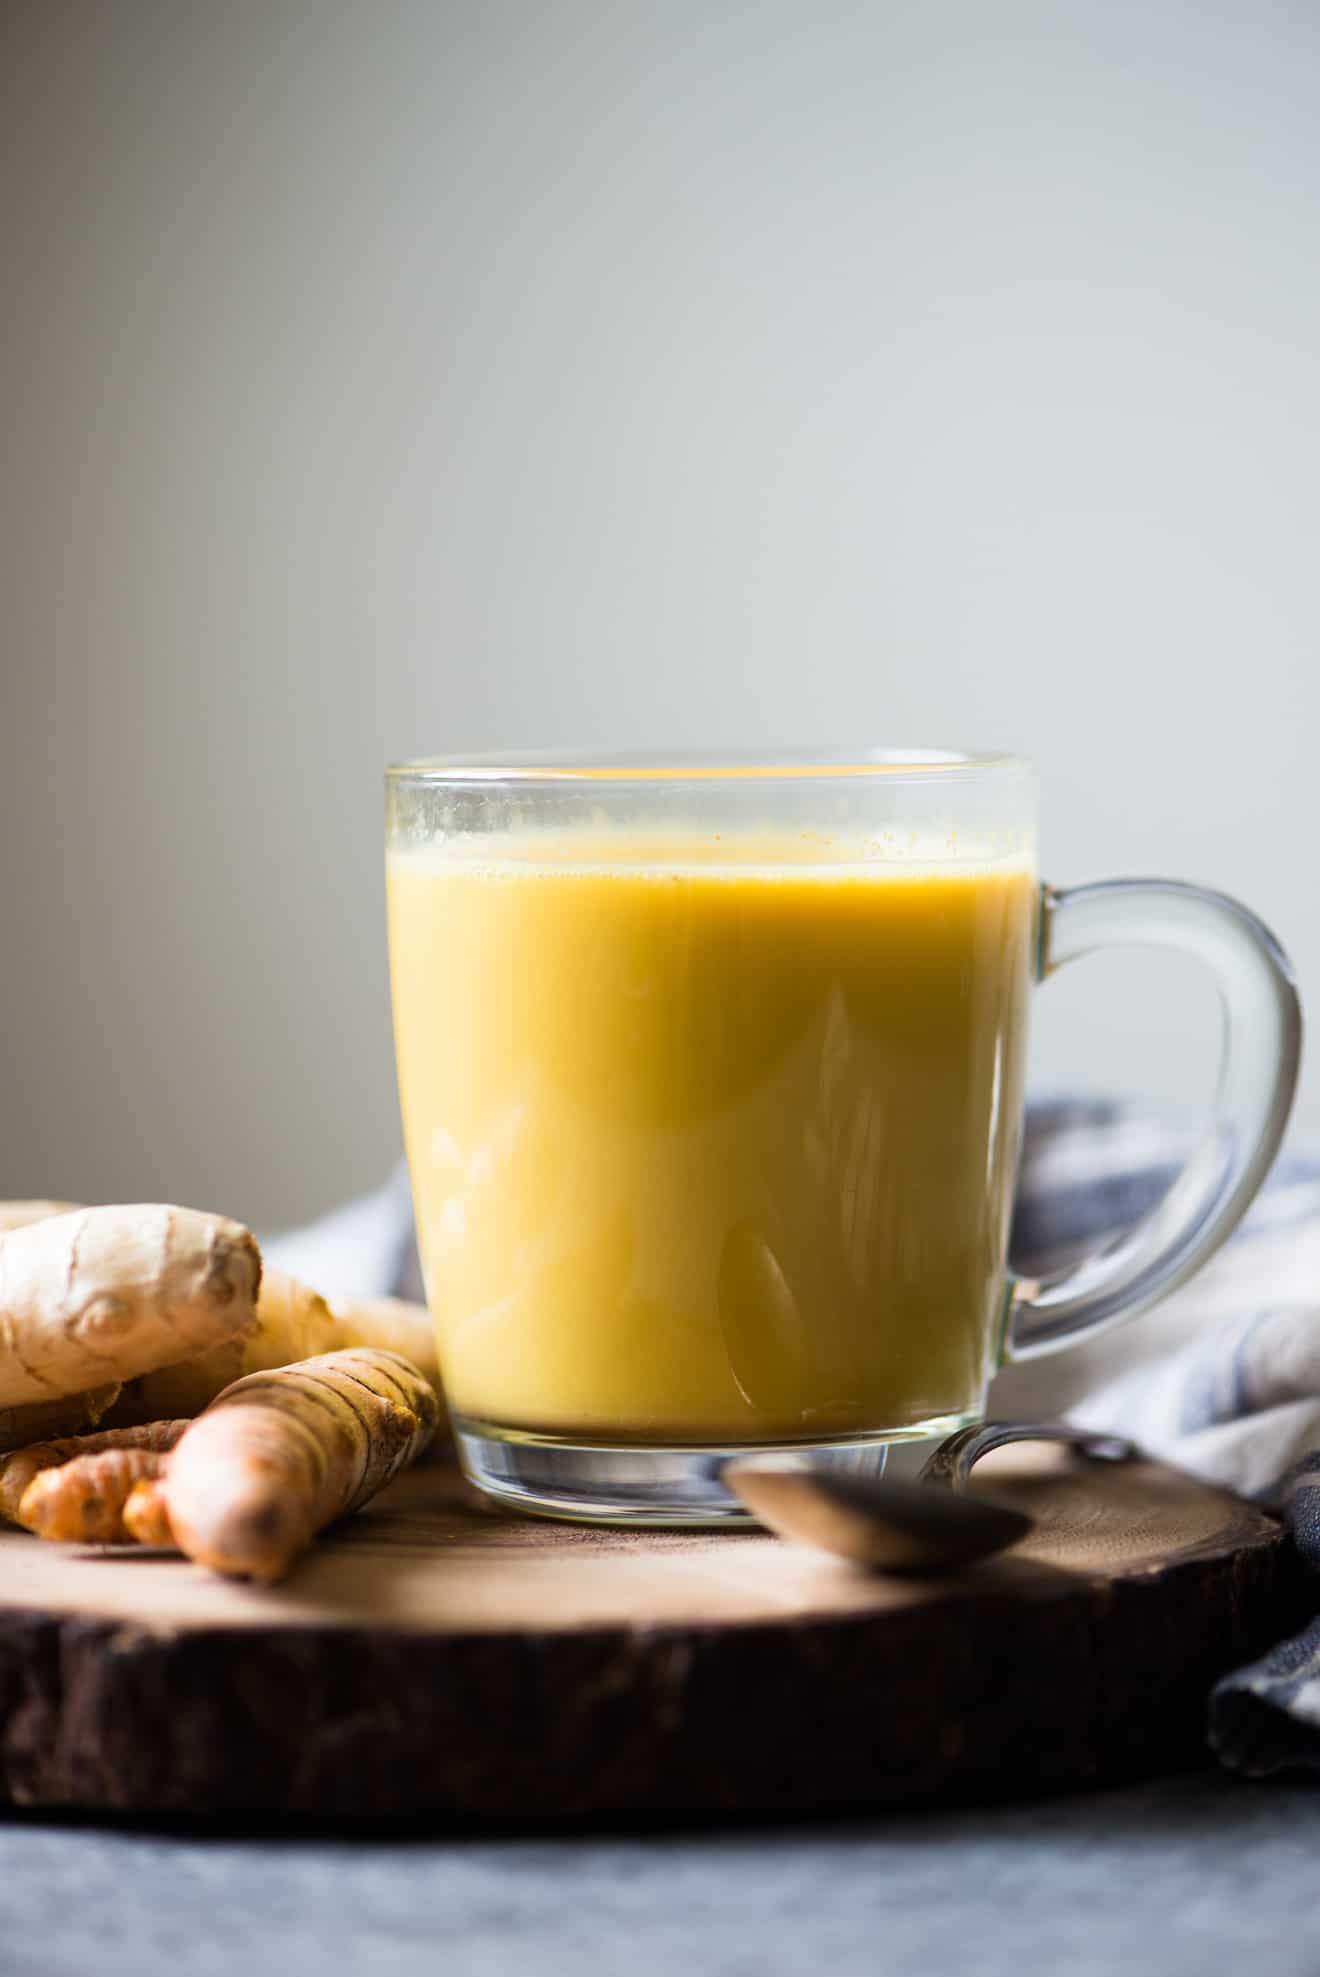 Golden Milk (or Turmeric Milk) is high in antioxidants and has anti-inflammatory properties. Making it at home is very easy. All you need is 5 basic ingredients.